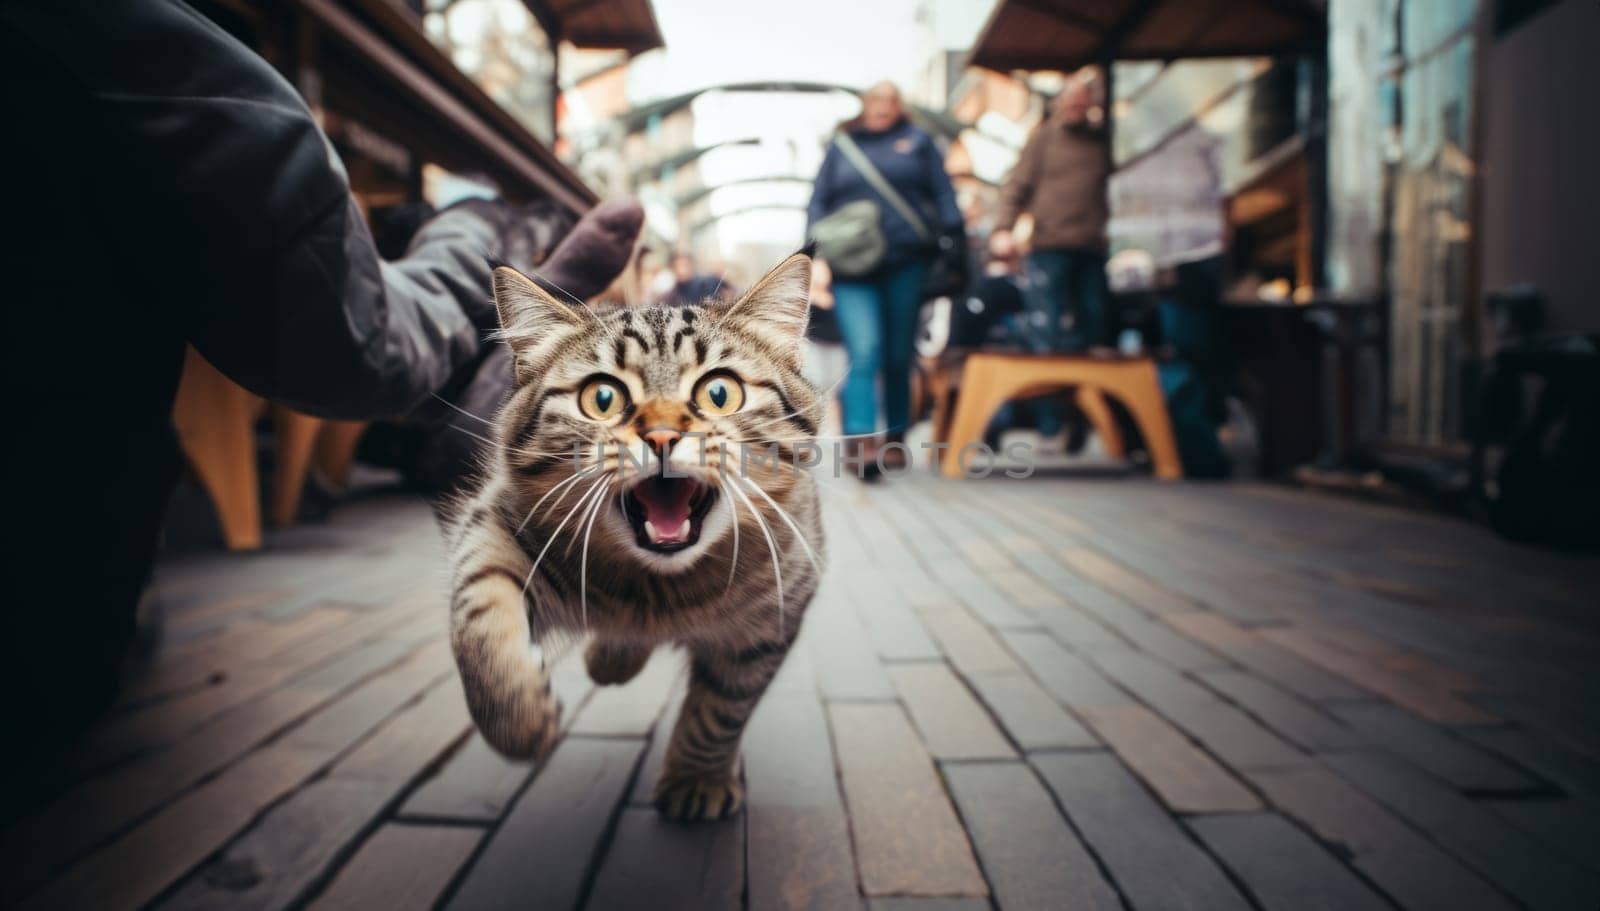 A close-up photograph captures a cat dashing through the urban streets with agility and speed, amidst the bustling cityscape.